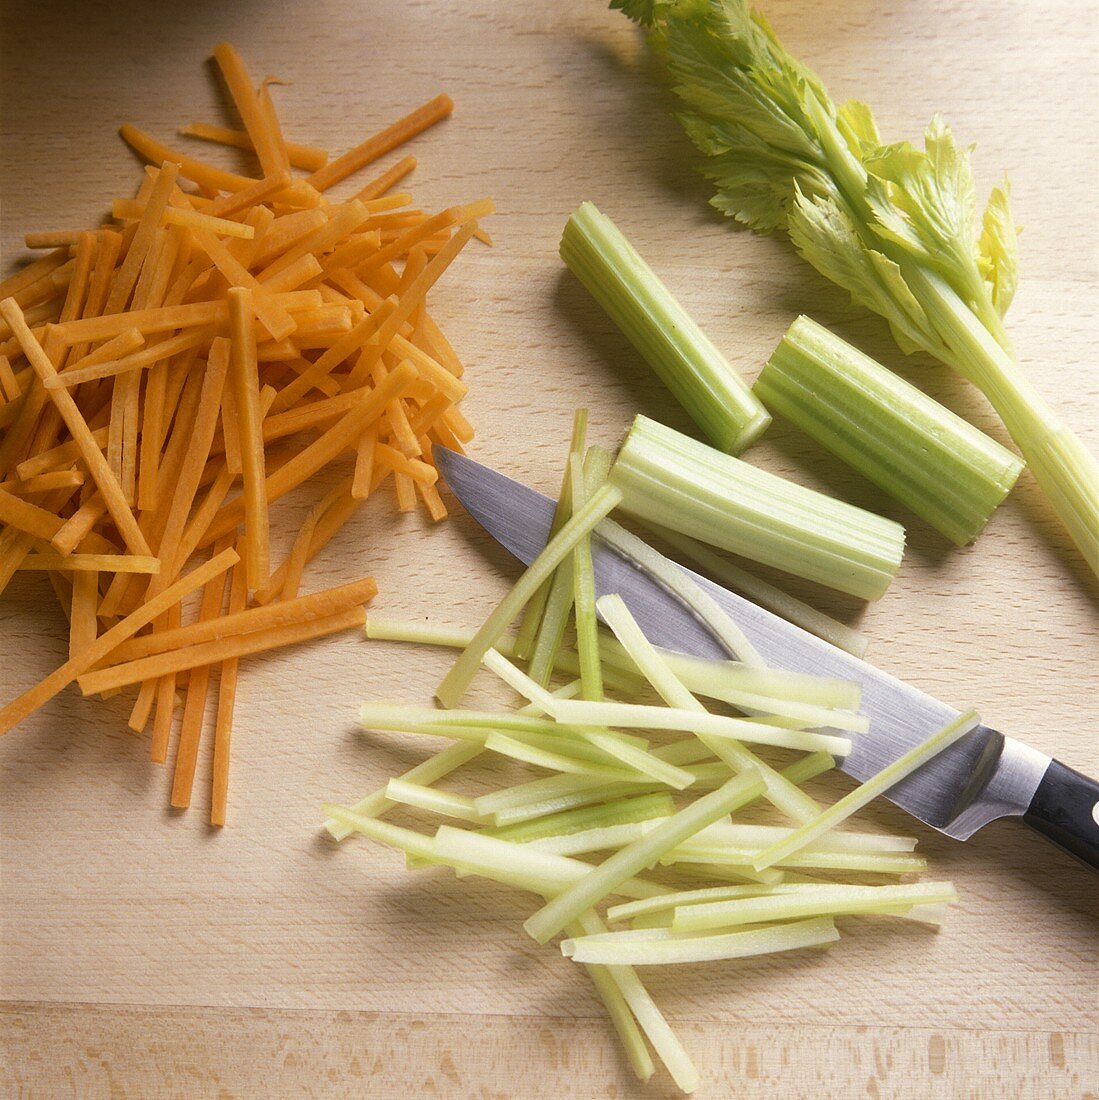 Cutting carrots and celery into strips